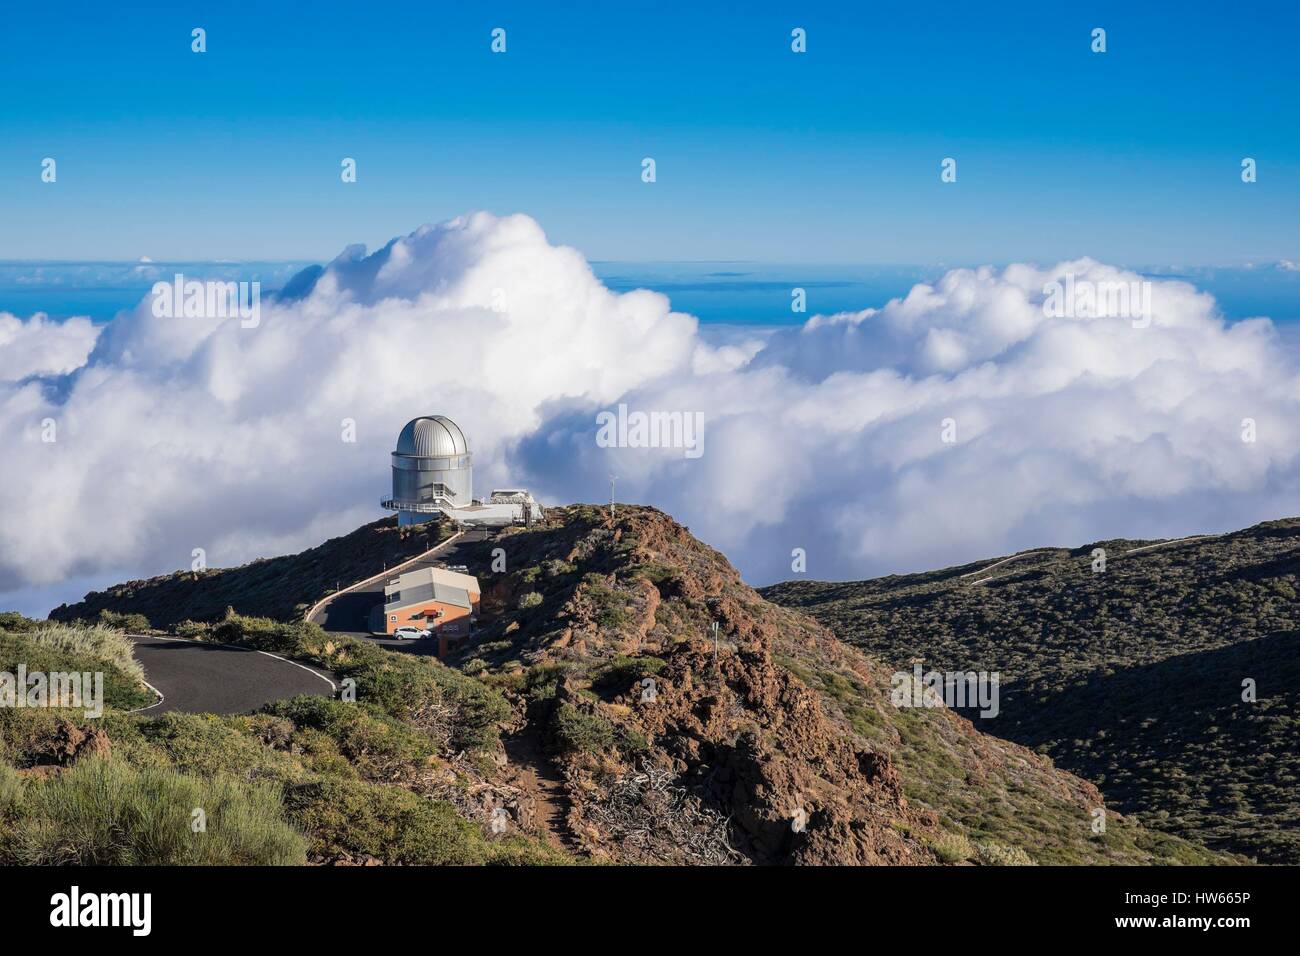 Spain, Canary Islands, La Palma island declared a Biosphere Reserve by UNESCO, Caldera de Taburiente National Park, the Astrophysical Observatory of Roque de los Muchachos, highest point of the island (alt: 2426 m), is one of the best places in the world for stargazing Stock Photo